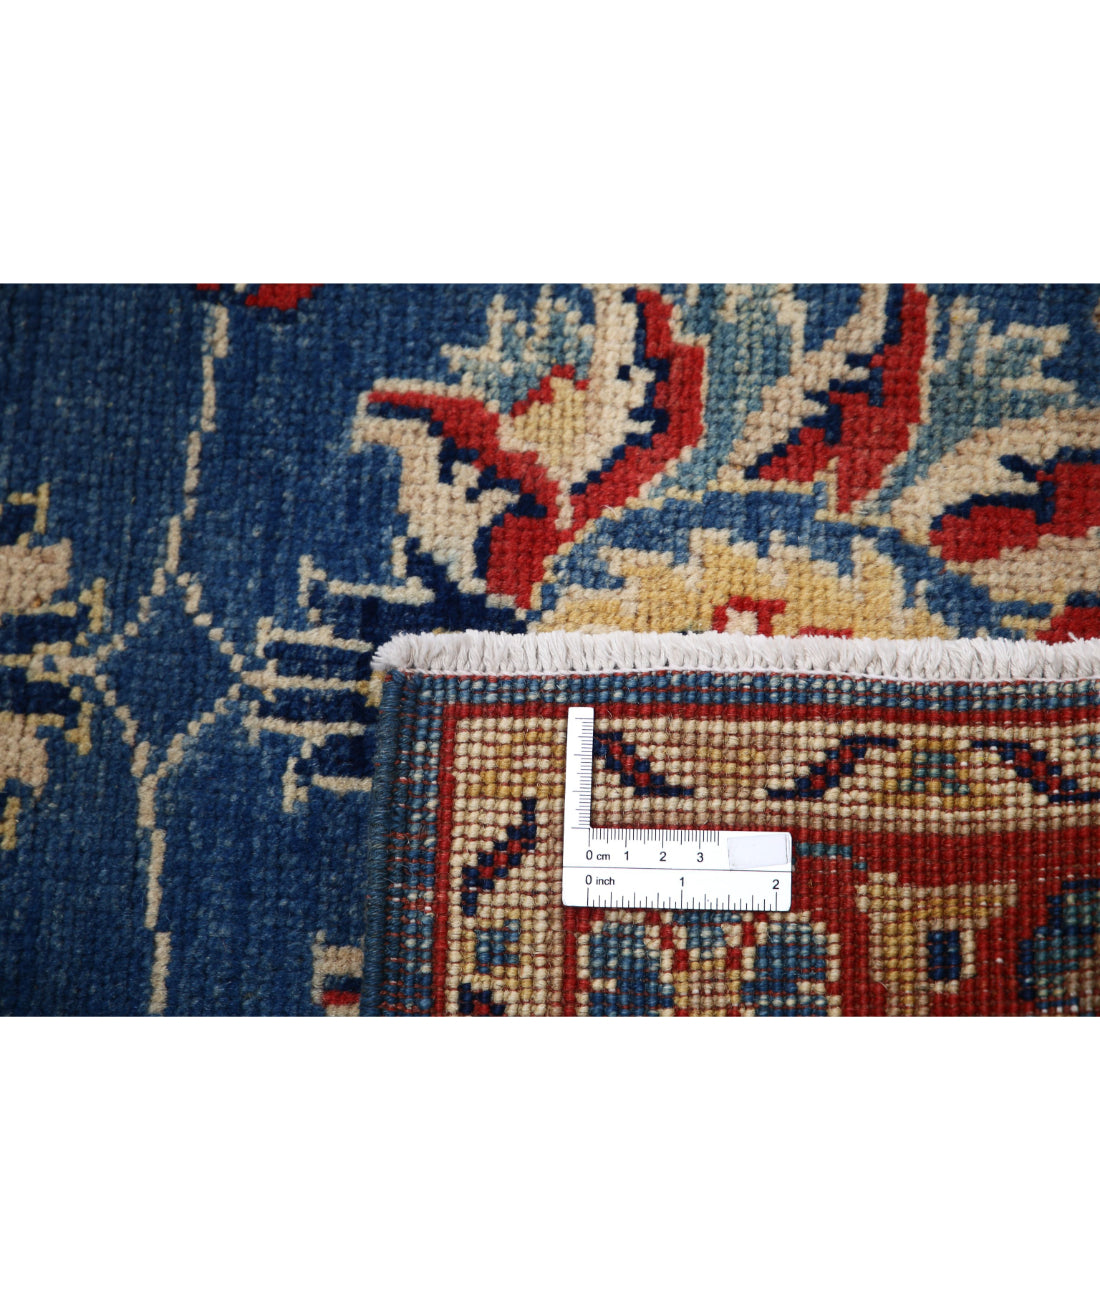 Ziegler 2'8'' X 3'10'' Hand-Knotted Wool Rug 2'8'' x 3'10'' (80 X 115) / Blue / N/A